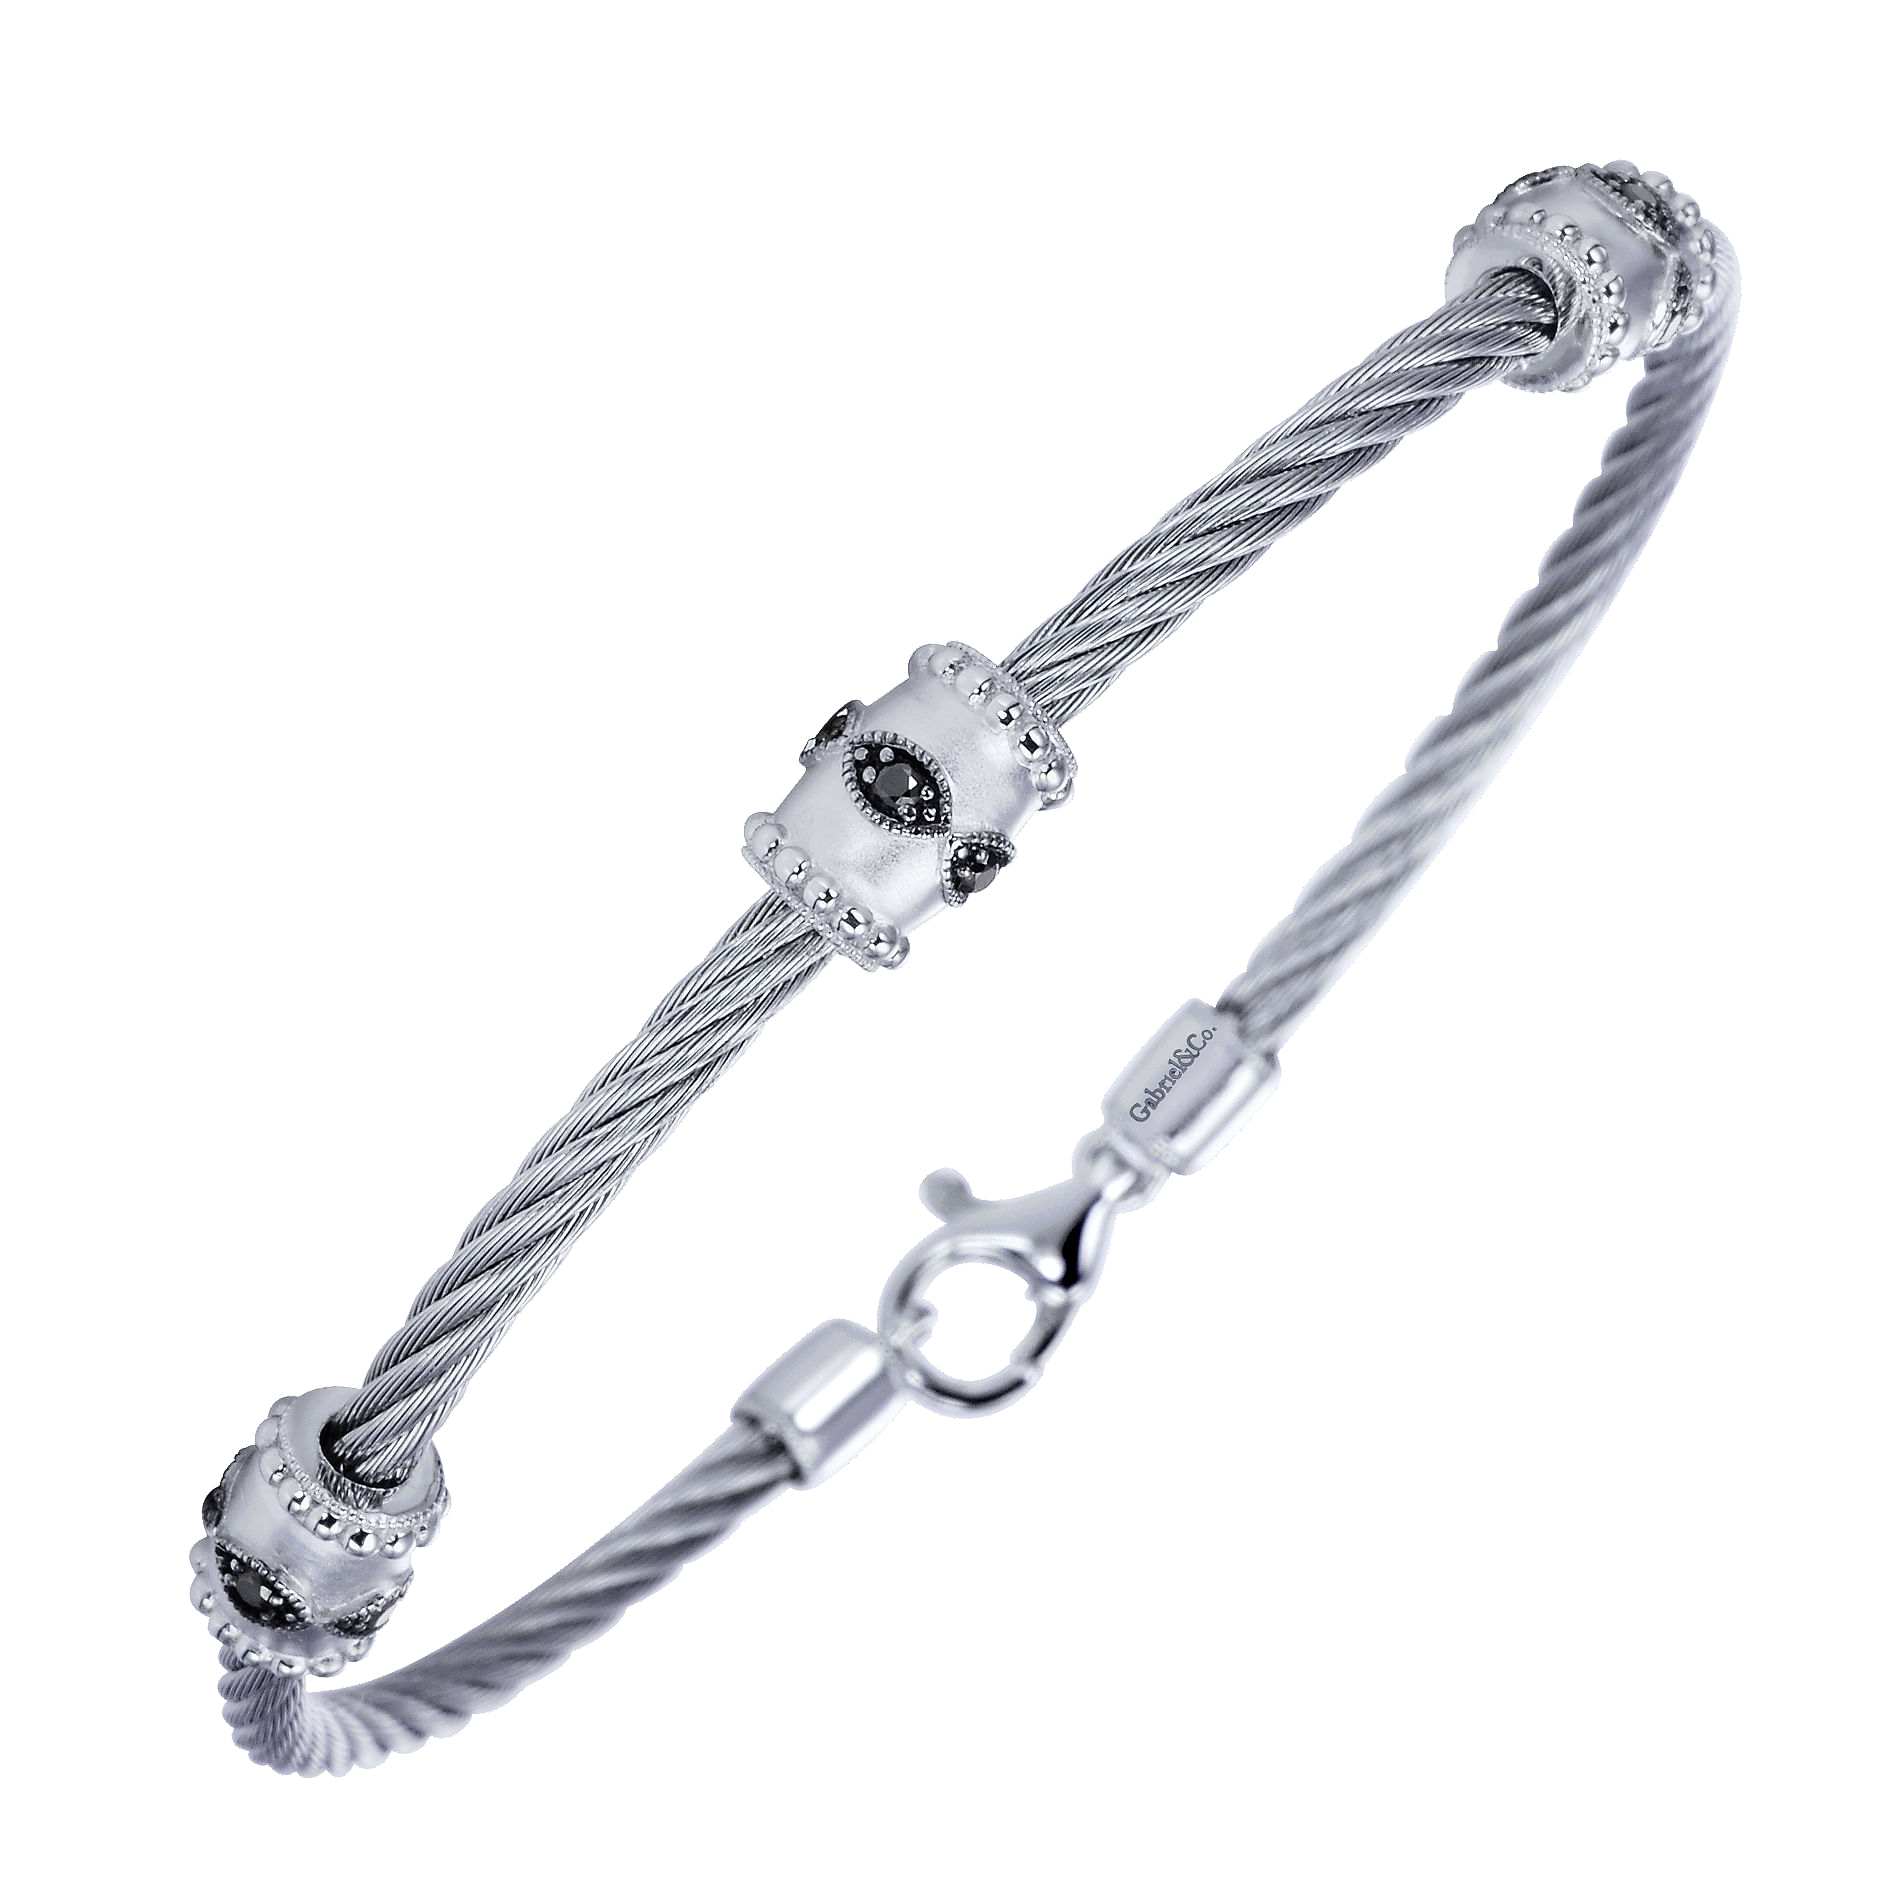 925 Sterling Silver-Stainless Steel Twisted Cable Bangle with 3 Black Diamond Metal Stations